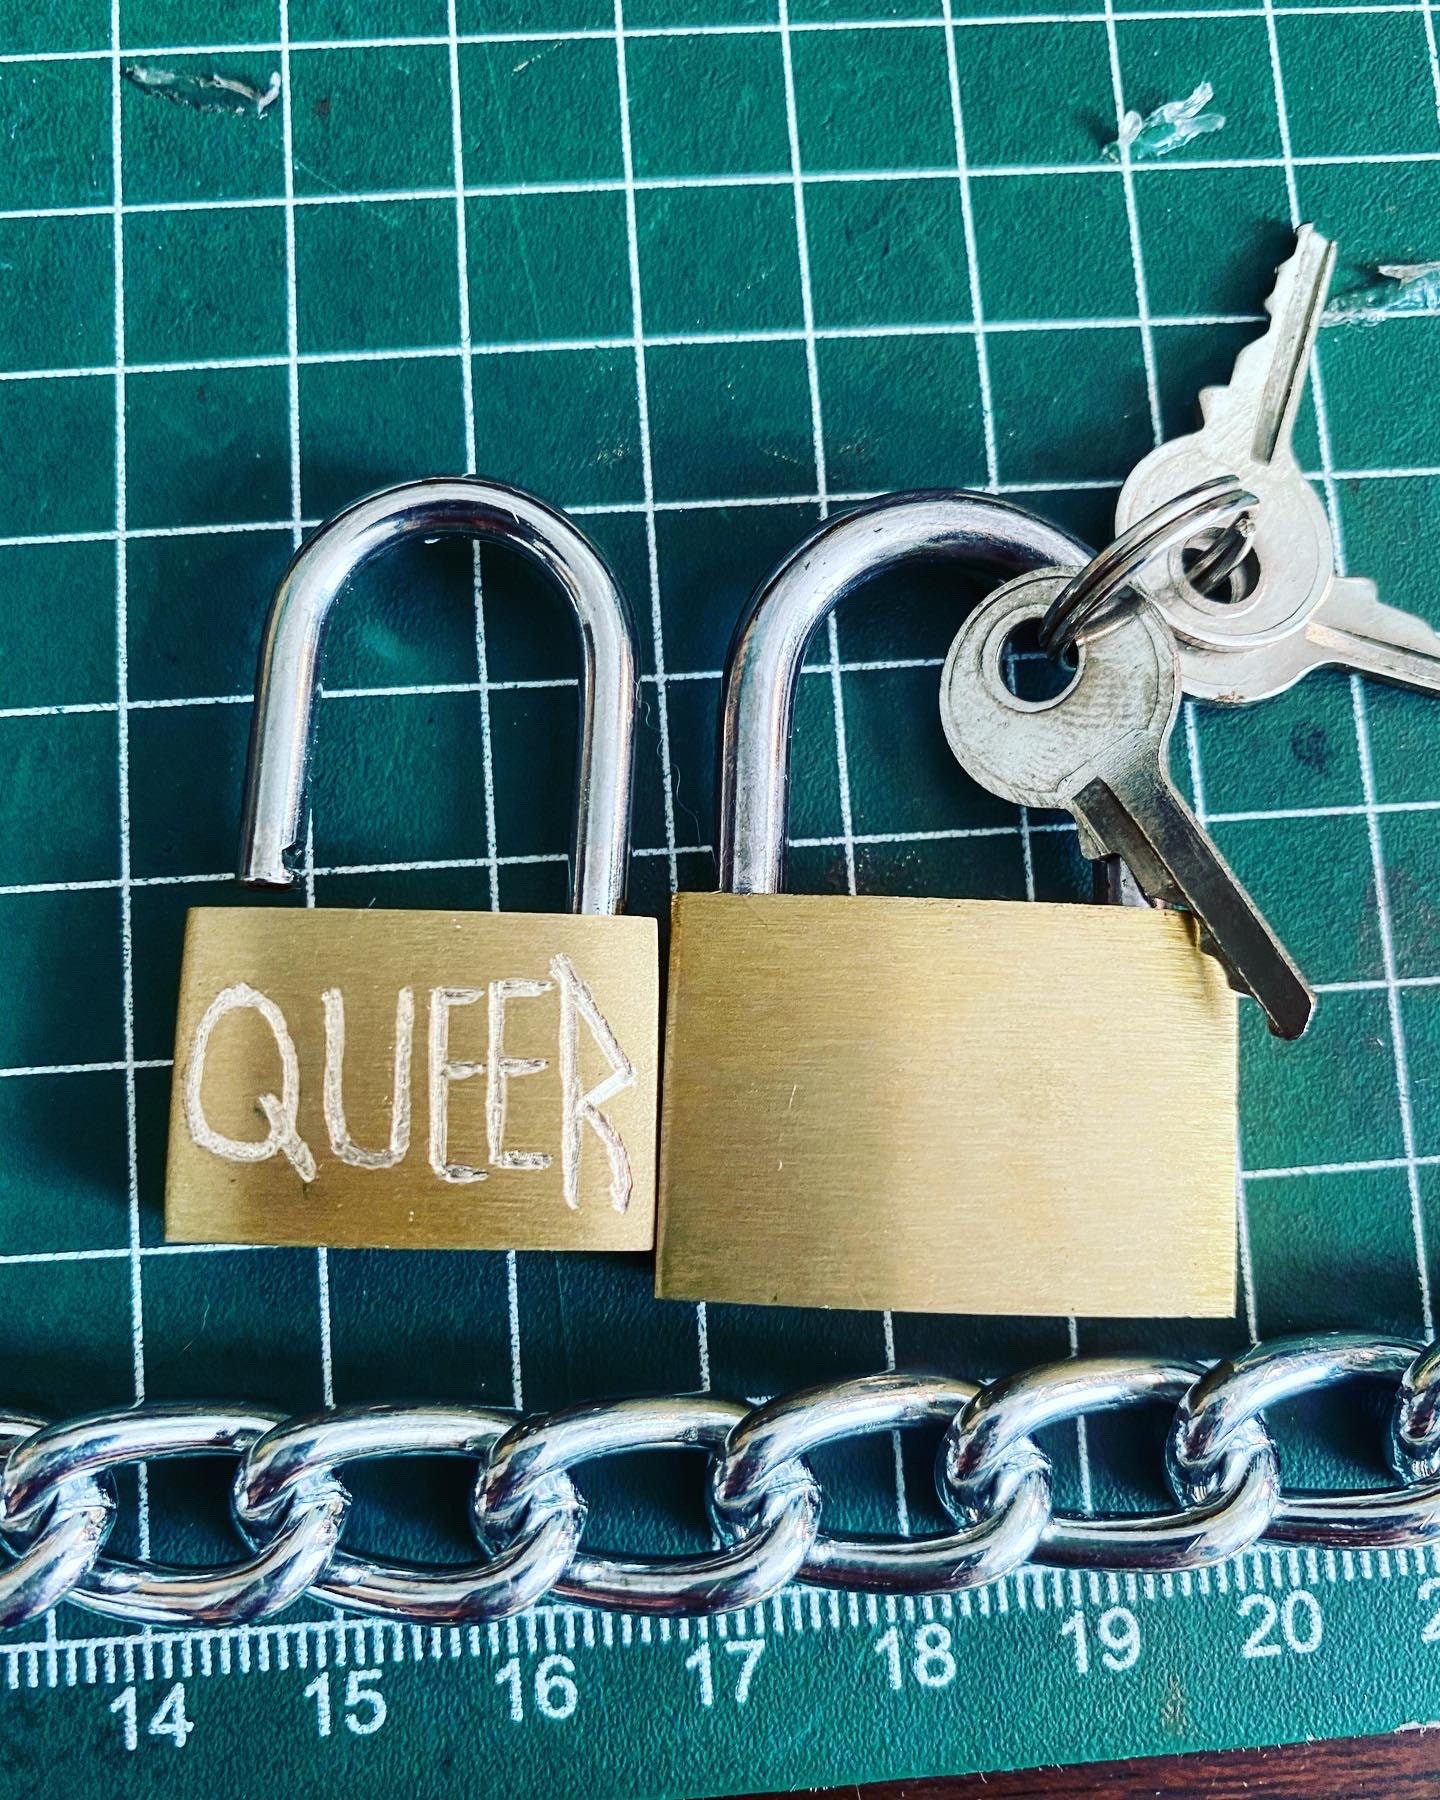 QUEER PADLOCK Chain. Hand Engraved Brass Padlock Neck Chain 